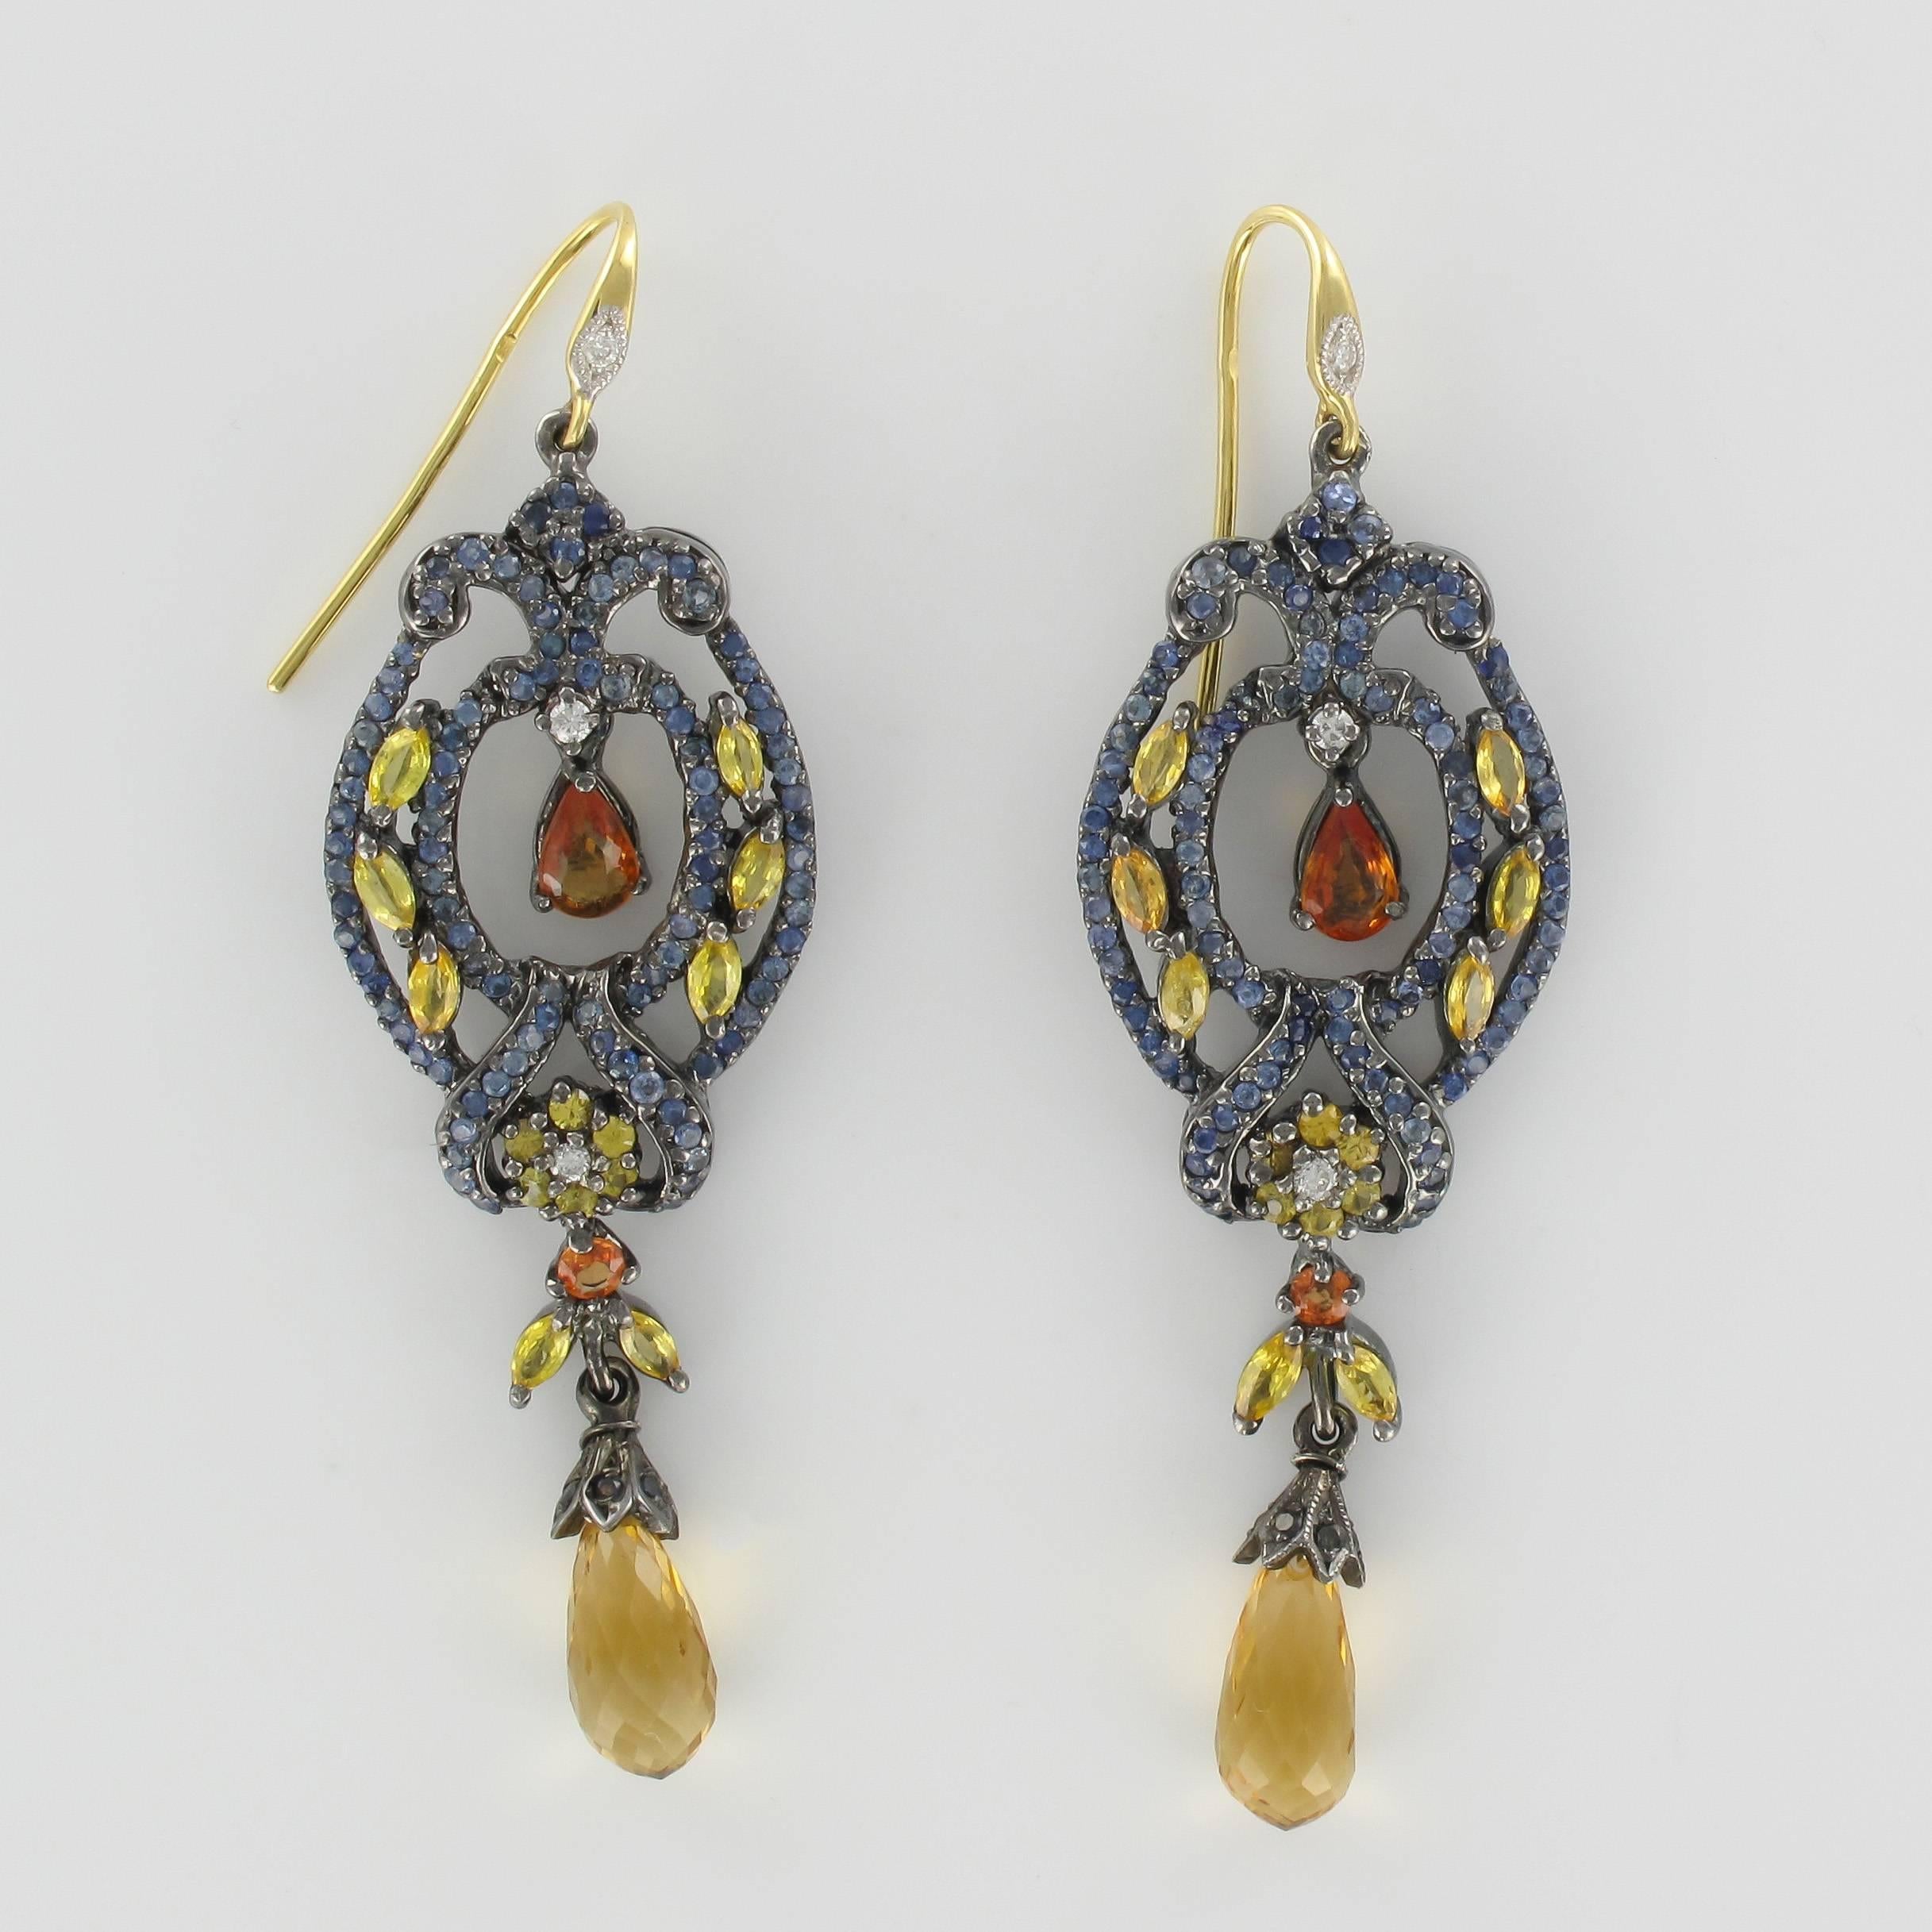 Pair of earrings in silver and yellow gold.

Each dangle earring is set with 221 blue sapphires, 2 orange sapphires, 46 yellow sapphires and 4 brilliant cut diamonds in an arabesque design. These earrings feature goose neck fittings each set with a